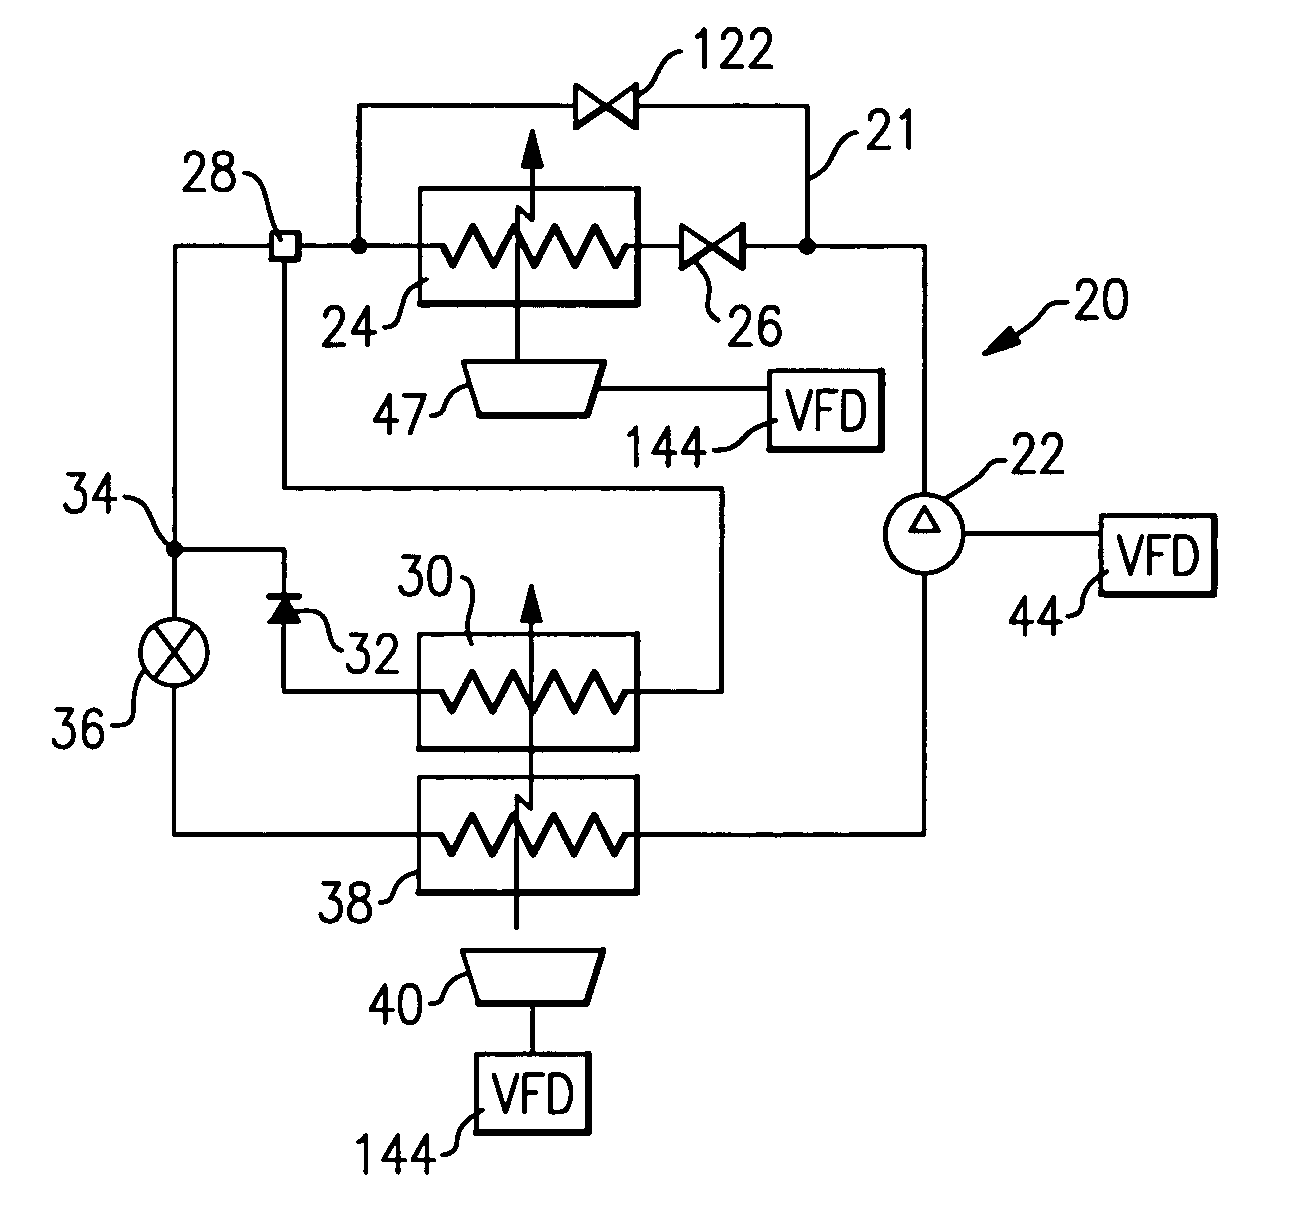 Refrigerant system with variable speed compressor and reheat function